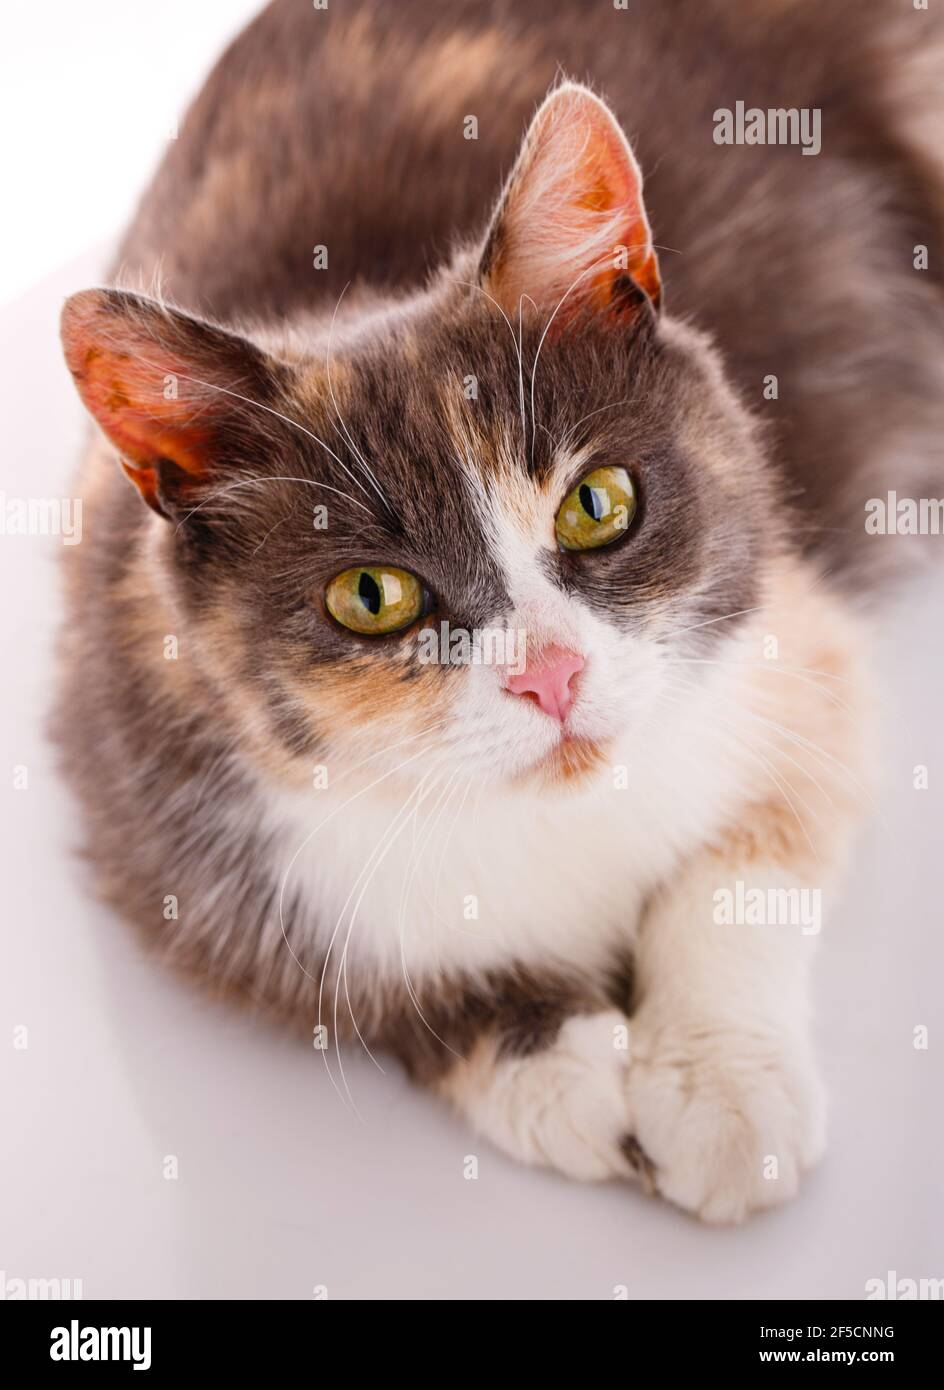 Portrait of a tricolor cat close up on a white background. Cat with his head raised and looking straight into the camera. Top view. Stock Photo